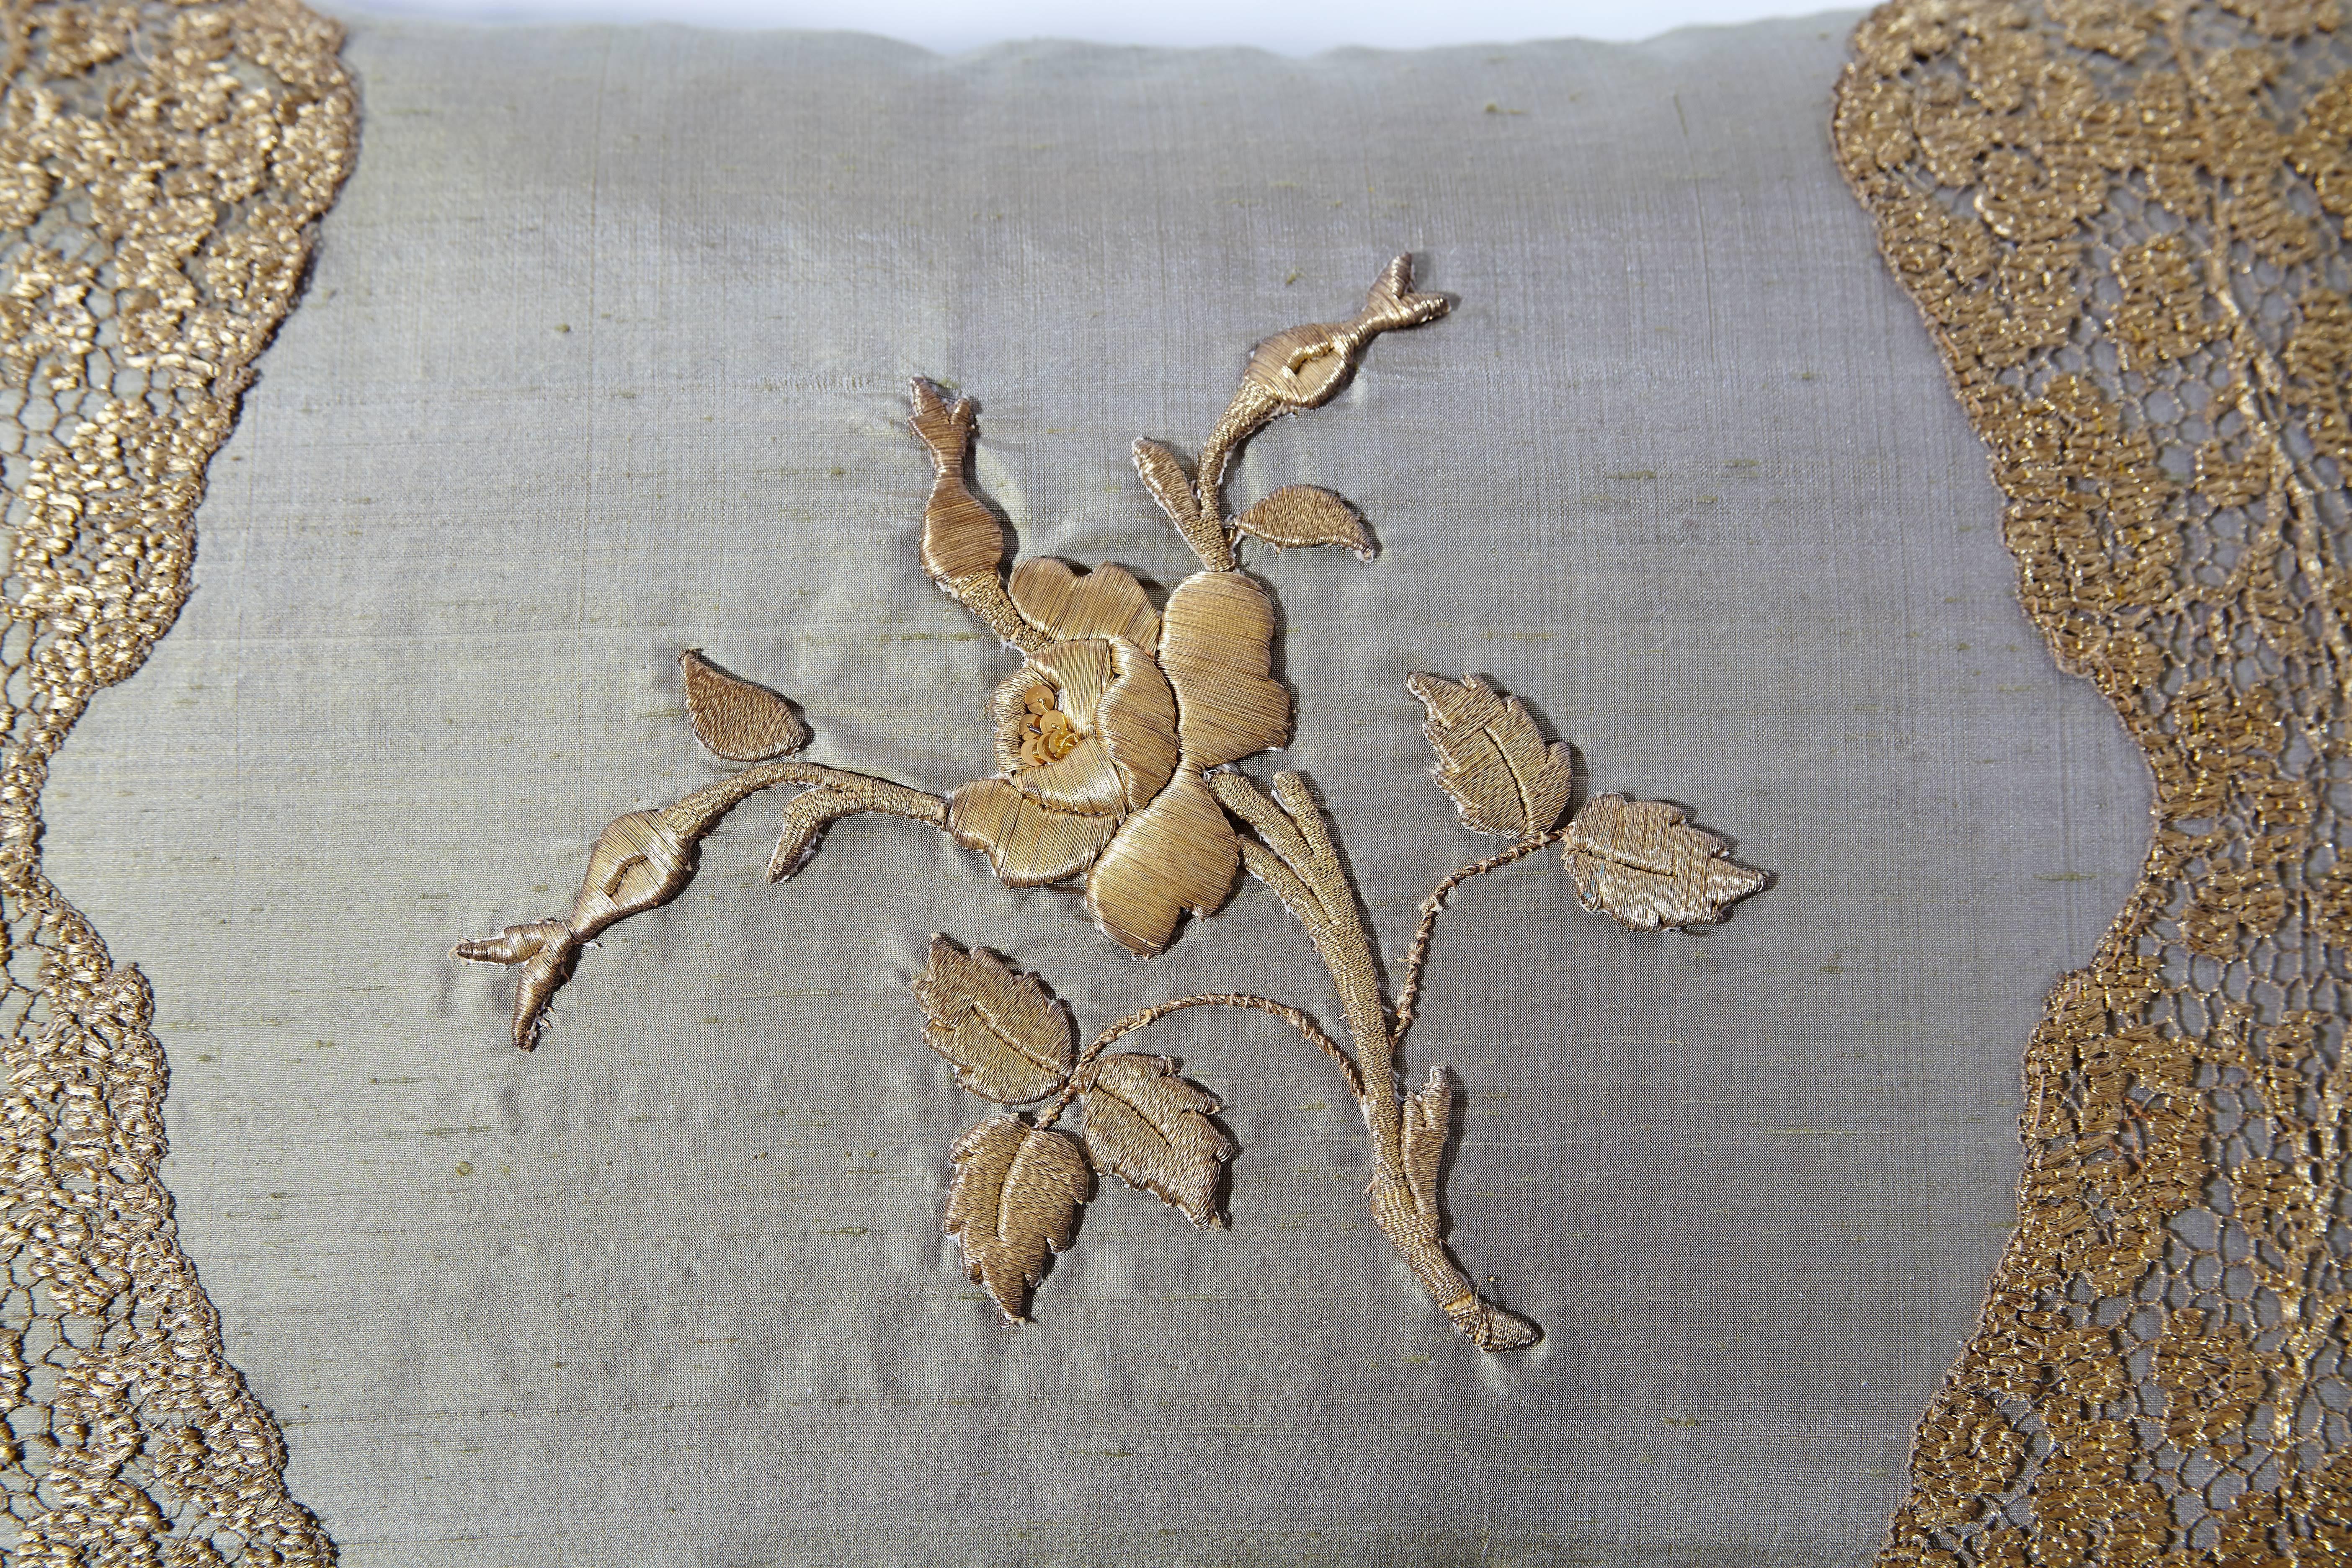 19th century Italian raised gold metallic embroidery of rose and leaves hand sewn on Italian pale green silk.  Two rare fragments of scalloped 19th century French handmade metallic thread pillow lace complete this pillow. Handcrafted by an Italian